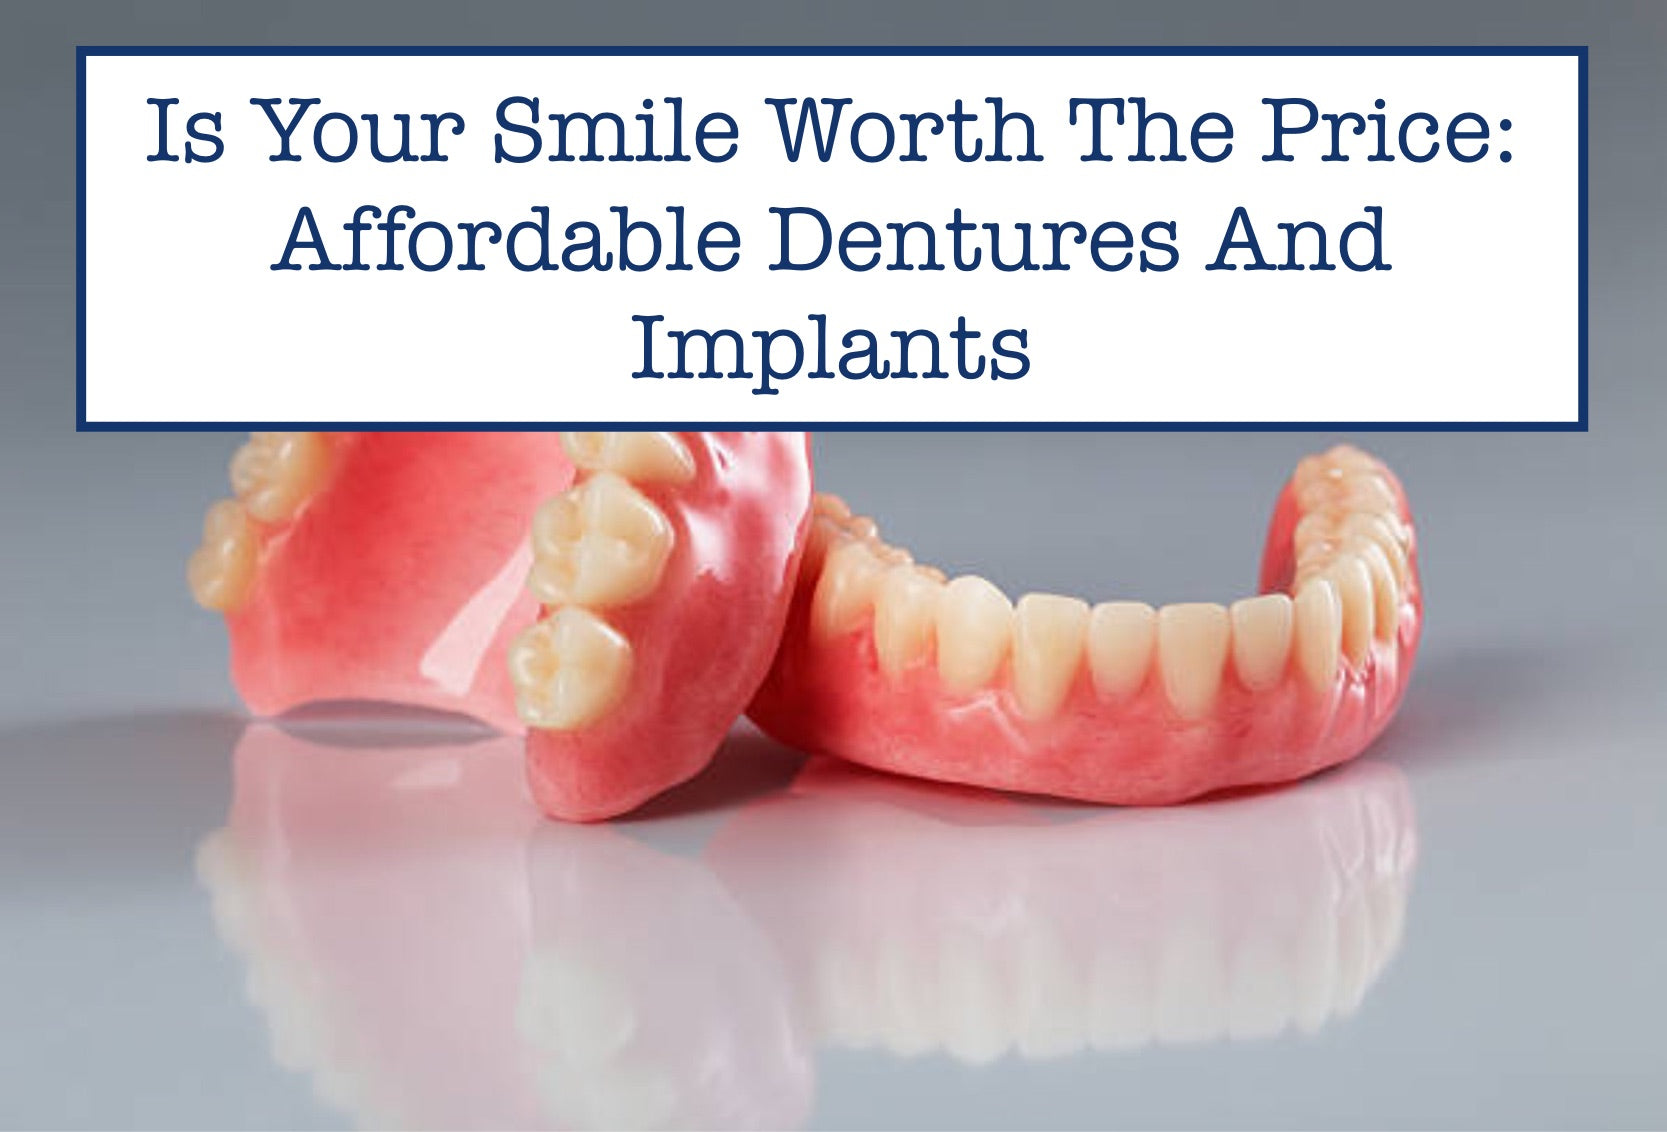 Is Your Smile Worth The Price: Affordable Dentures And Implants